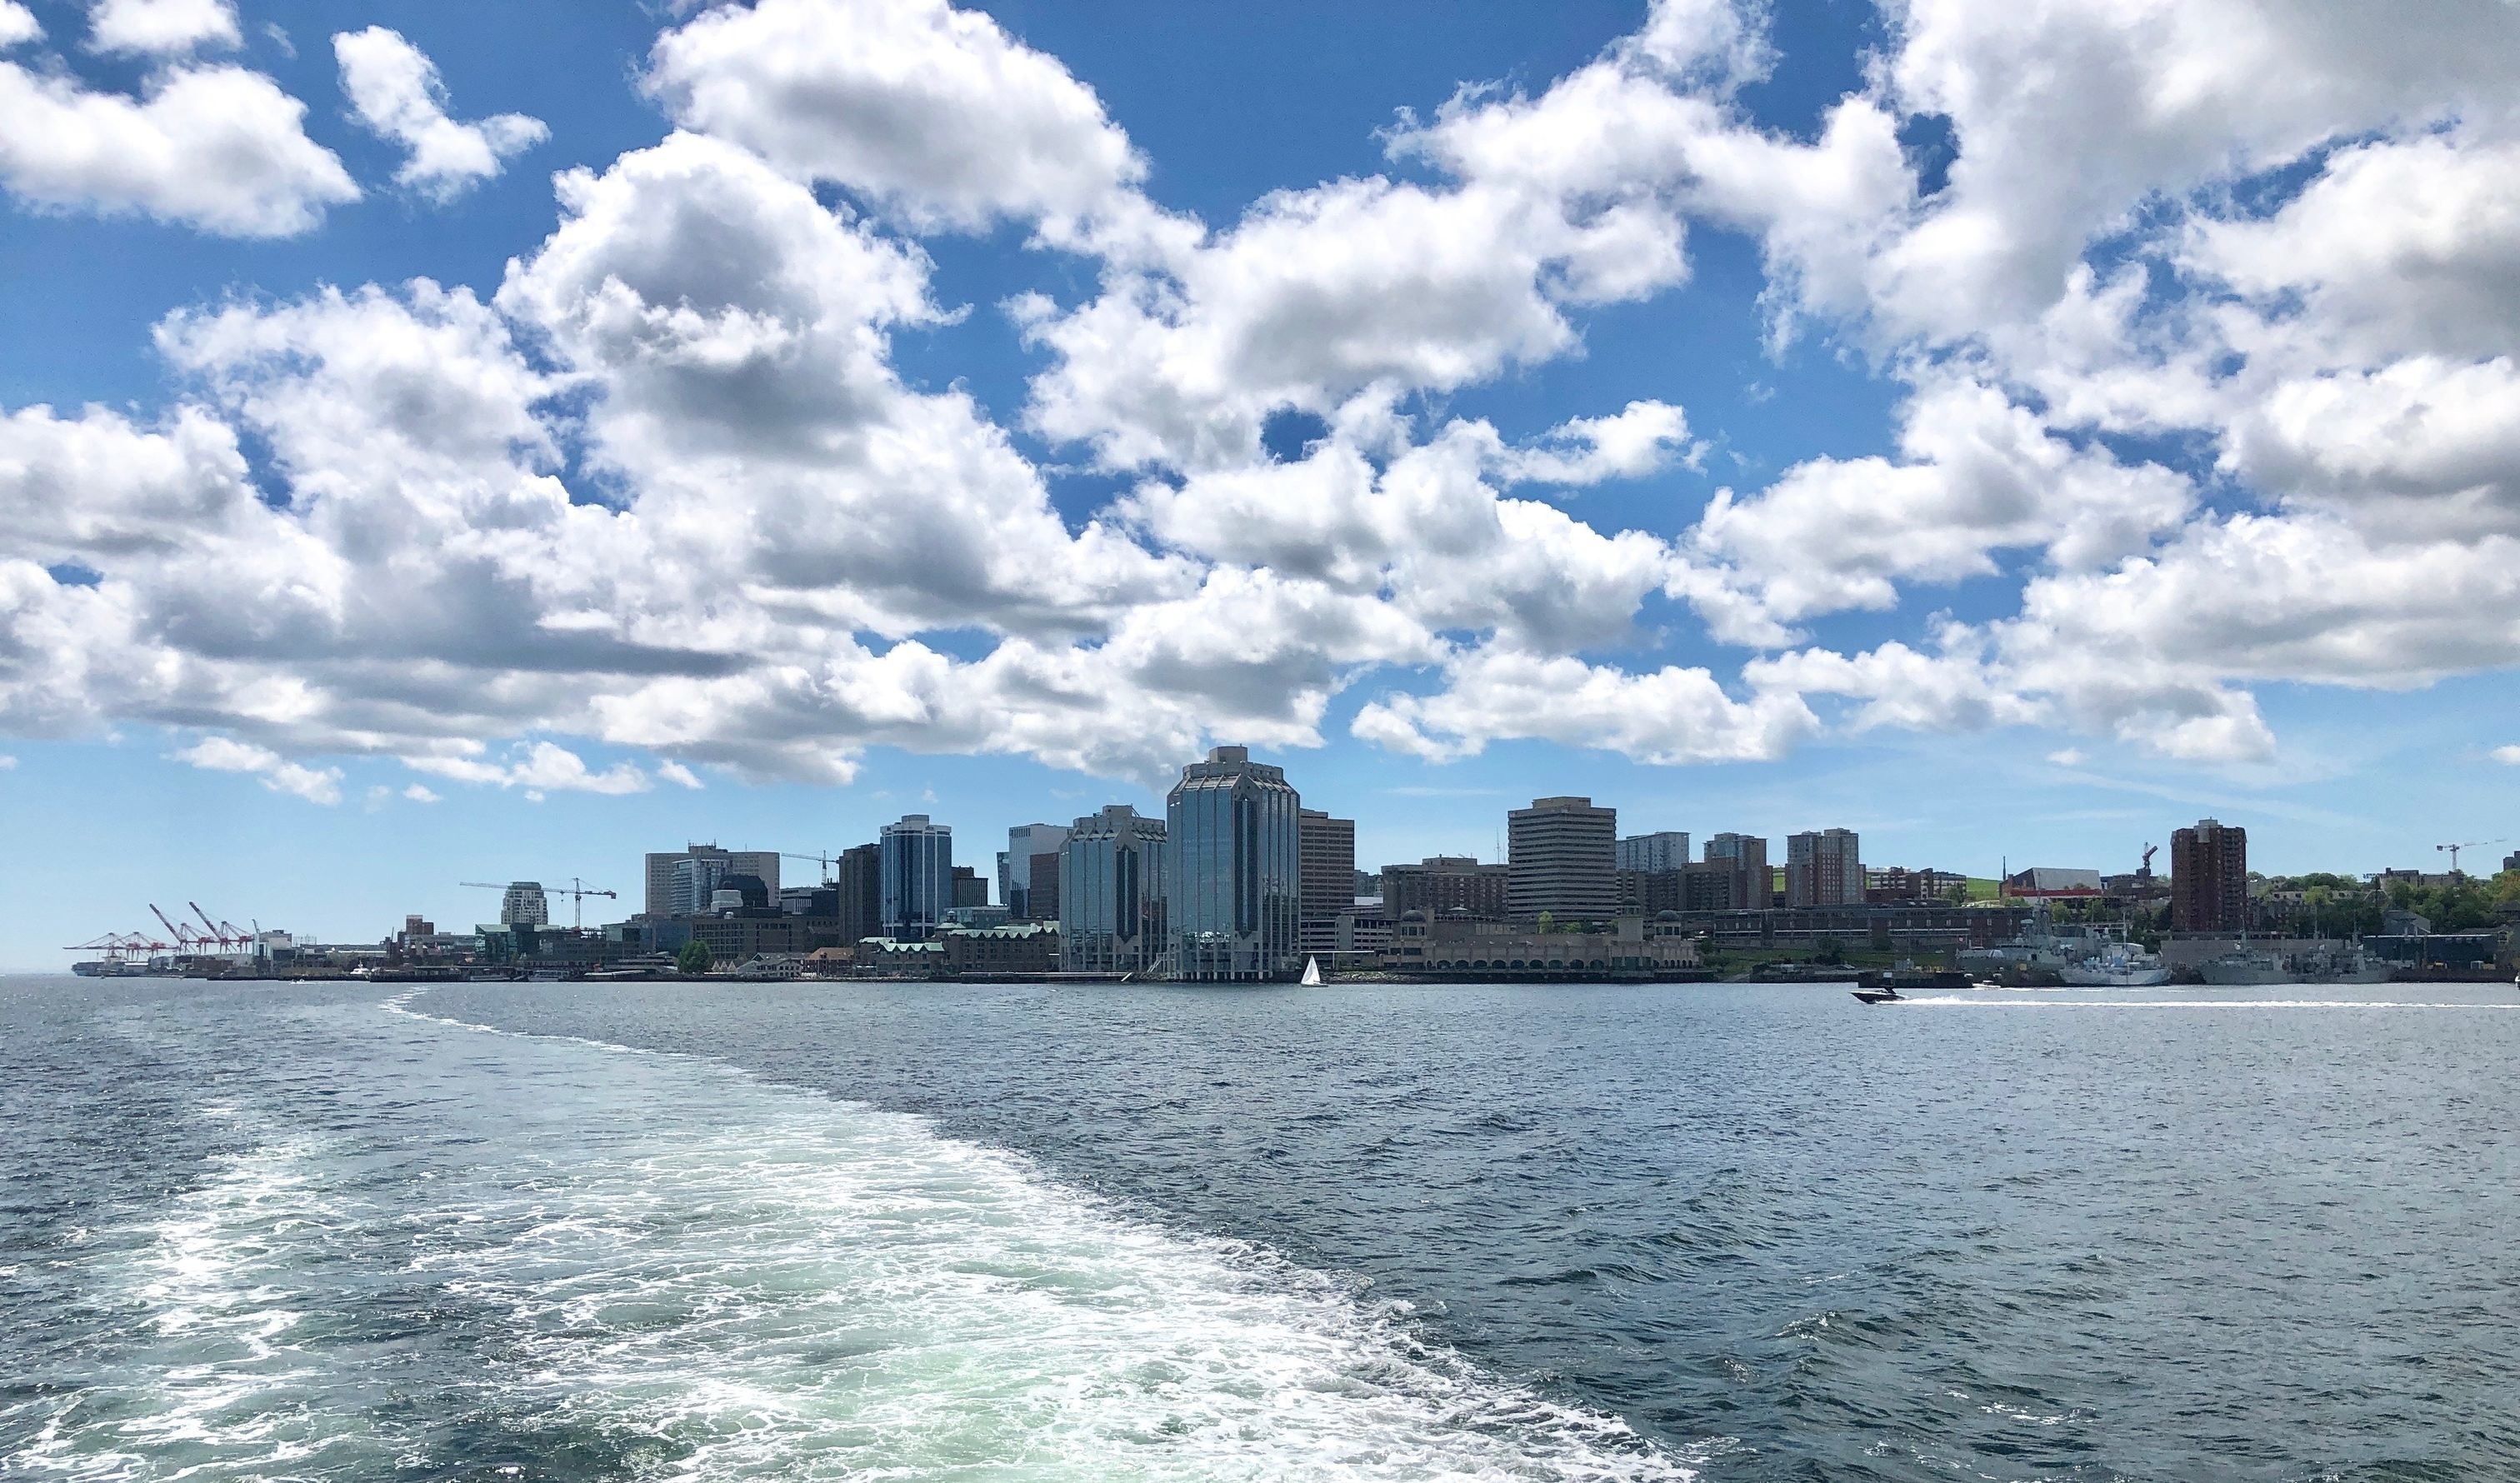 An image of the city skyline of Halifax, Nova Scotia. The buildings are framed by blue water and a cloudy blue sky.